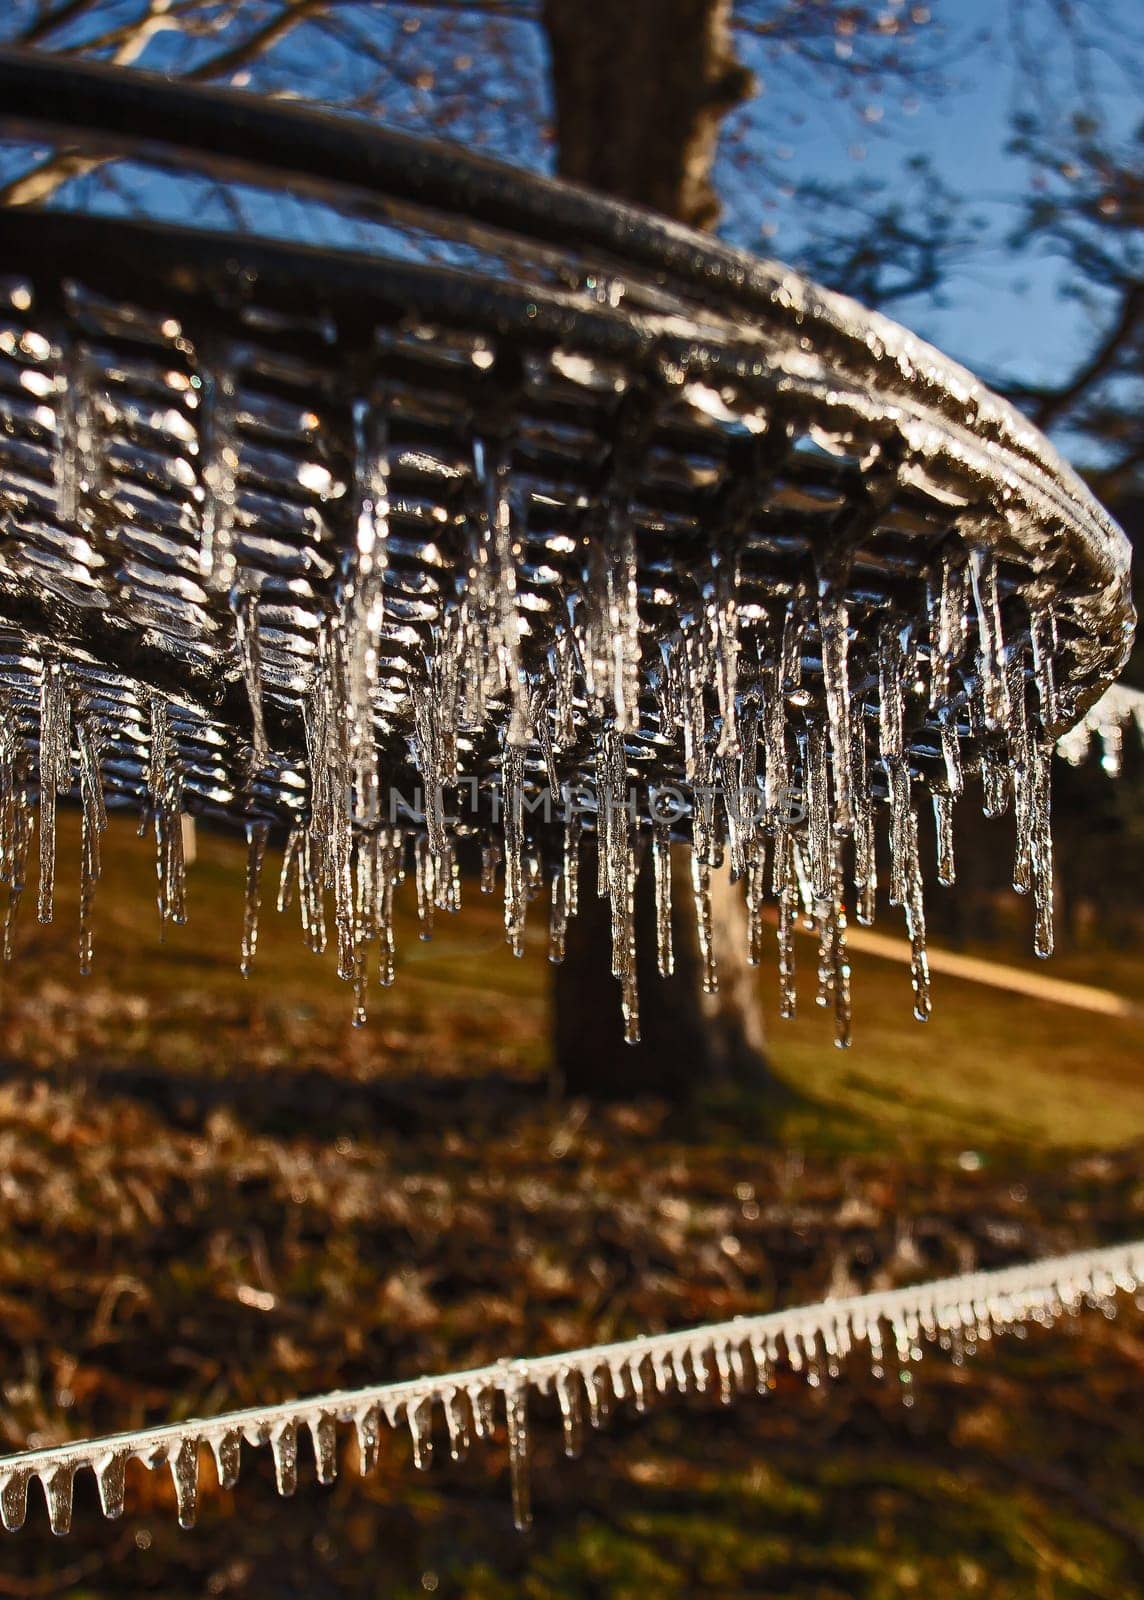 Icicles cought in the early morning rays at Mahai Campsite in the Drakensberg South Africa